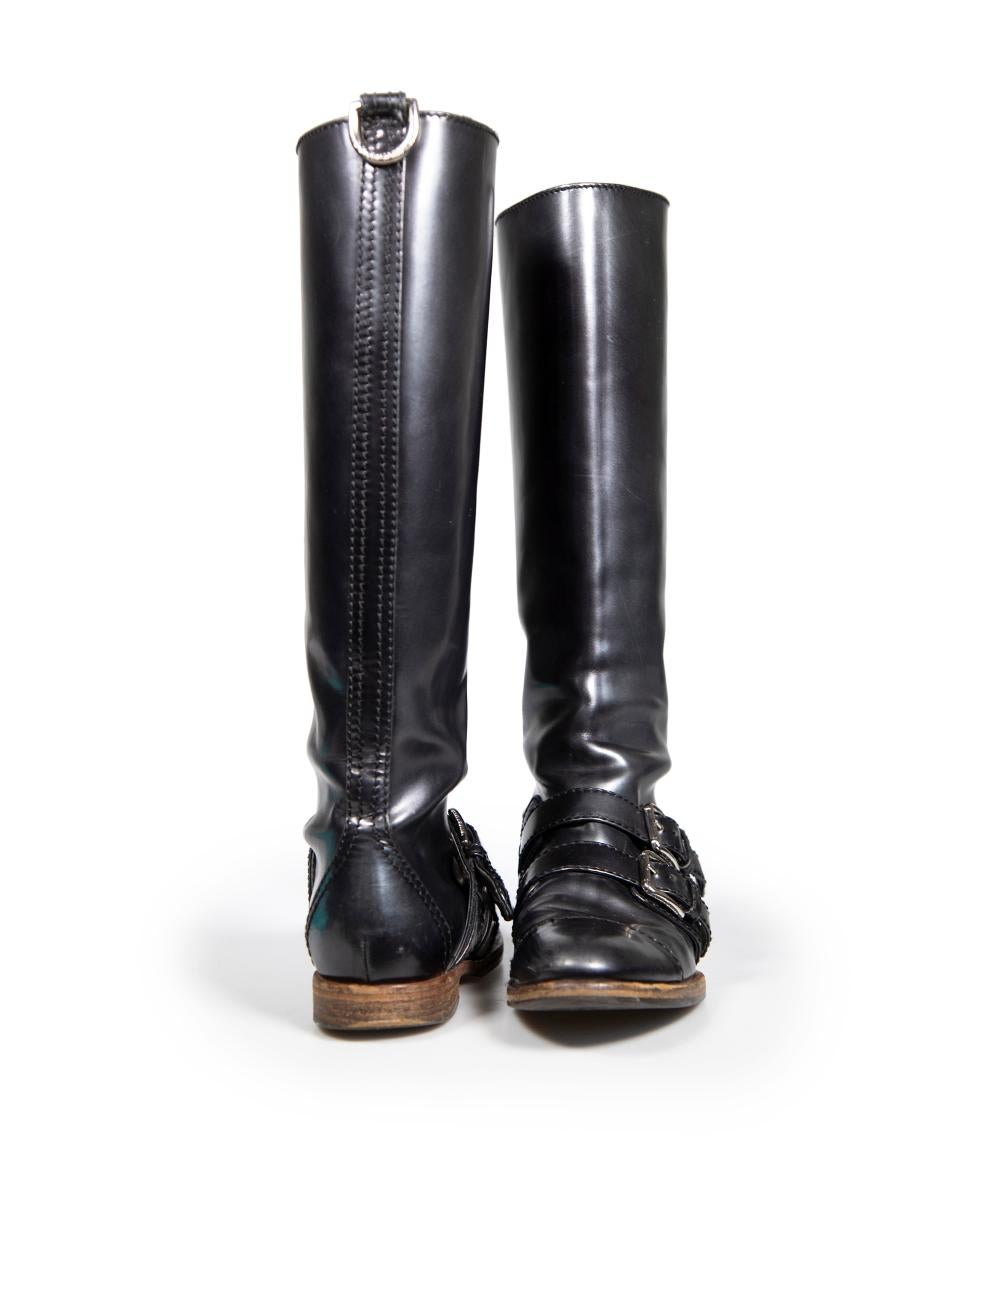 Dolce & Gabbana Black Leather Buckle Long Boots Size IT 39 In Good Condition For Sale In London, GB